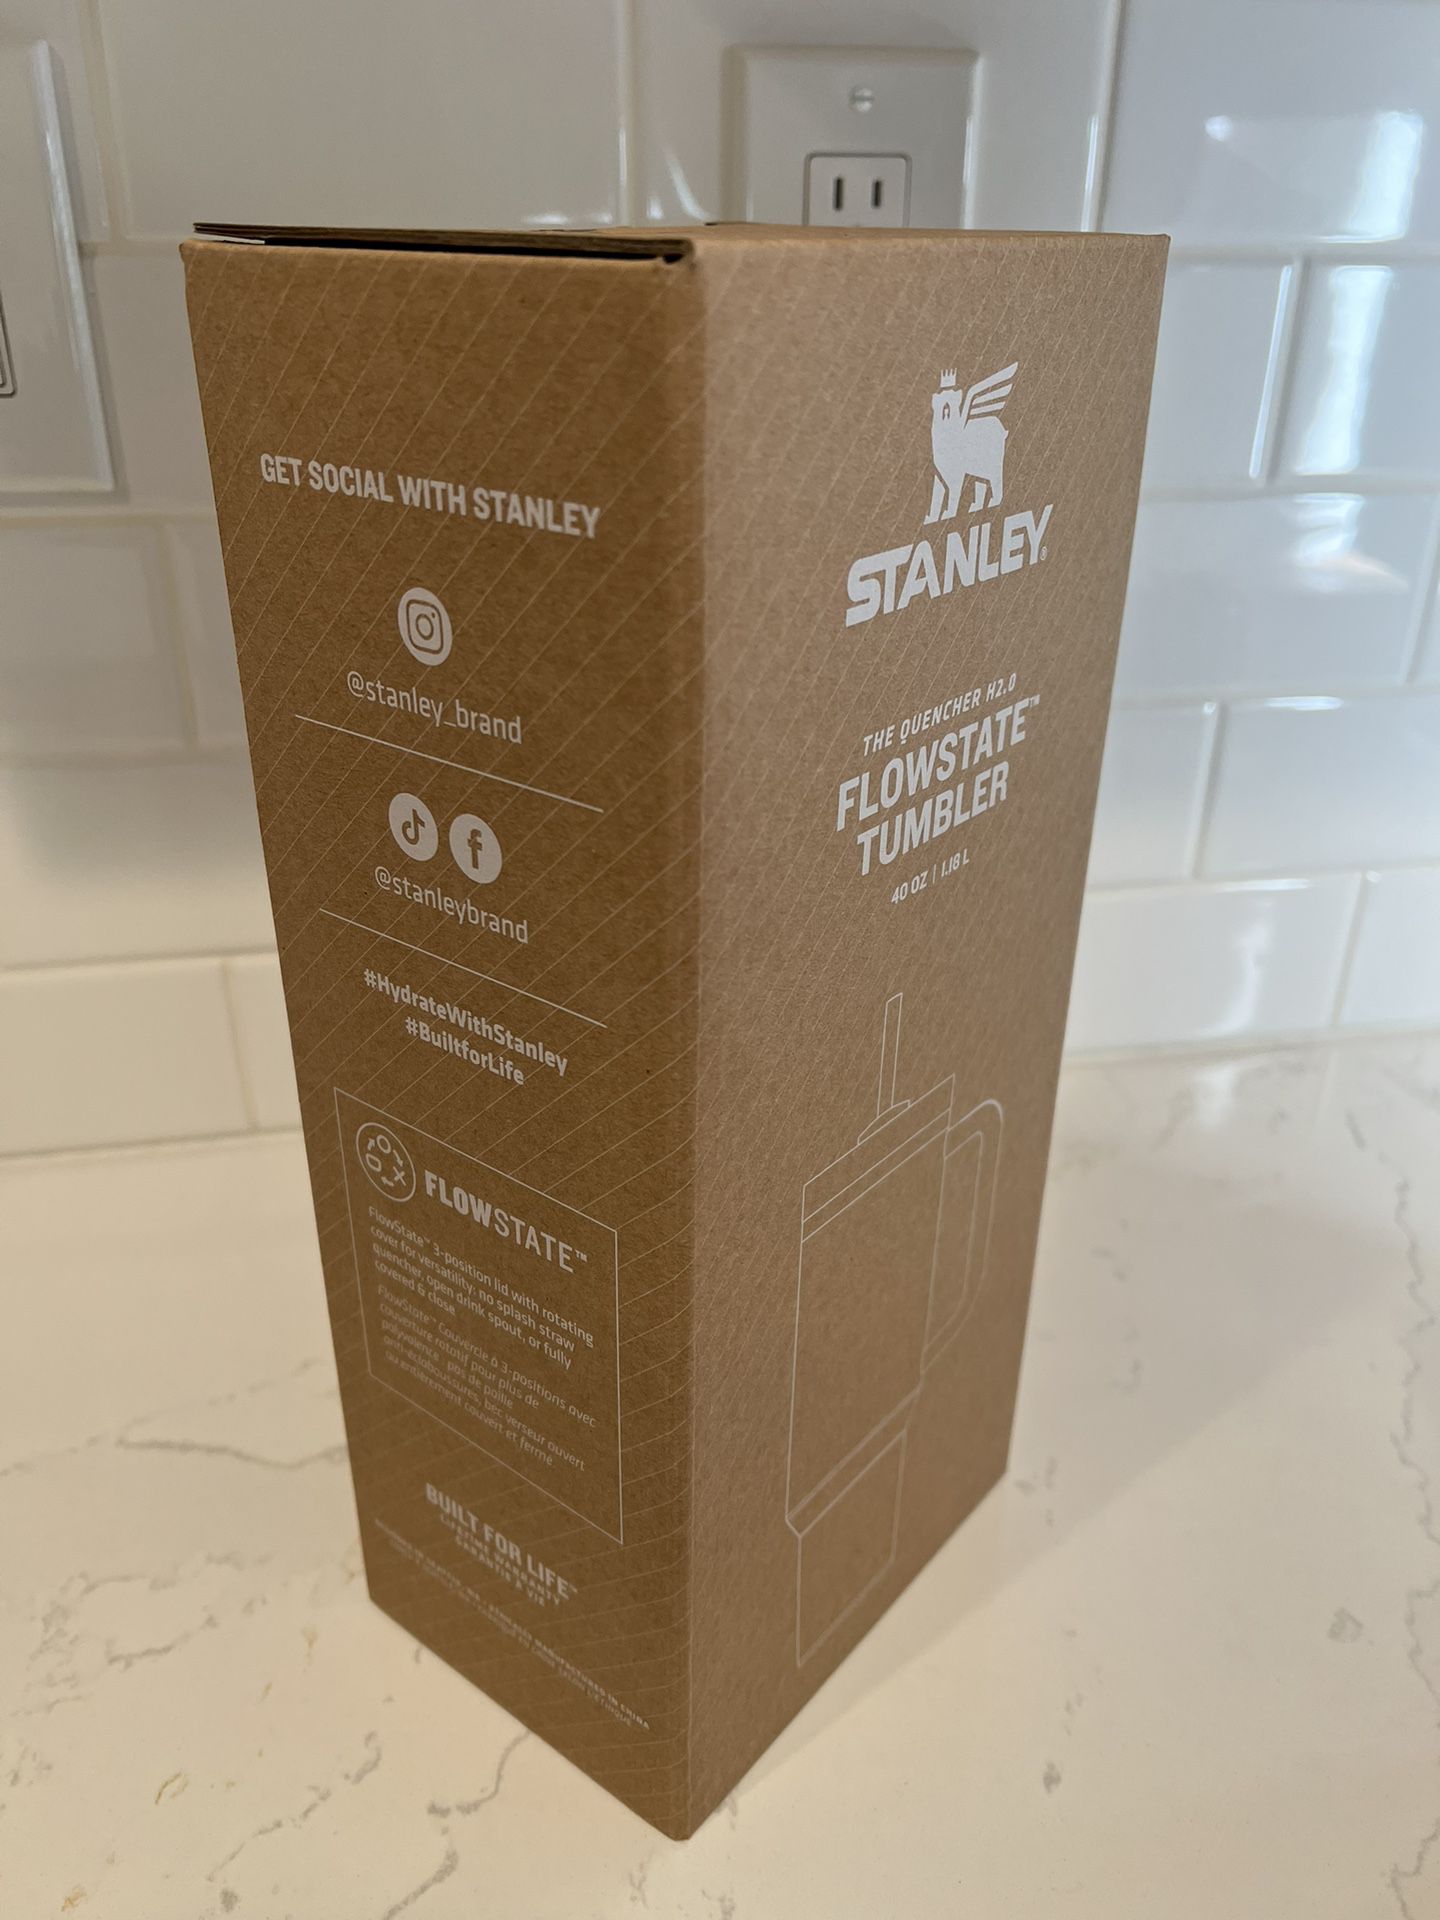 Stanley 30 oz. Quencher H2.0 Charcoal Grey Gray for Sale in El Cajon, CA -  OfferUp